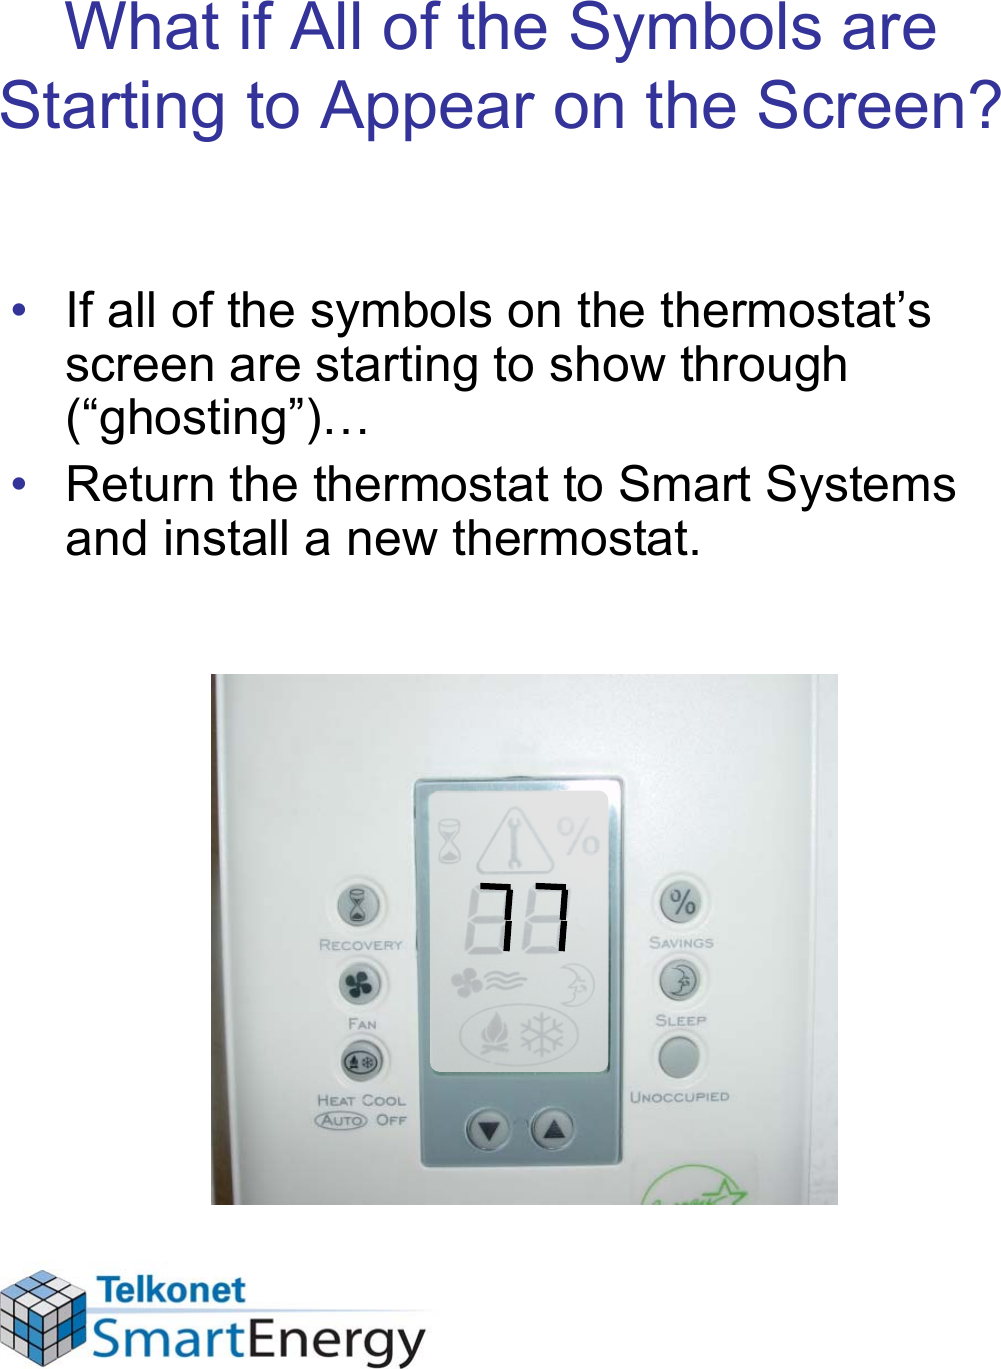 What if All of the Symbols are Starting to Appear on the Screen?• If all of the symbols on the thermostat’s screen are starting to show through (“ghosting”)…• Return the thermostat to Smart Systems and install a new thermostat.